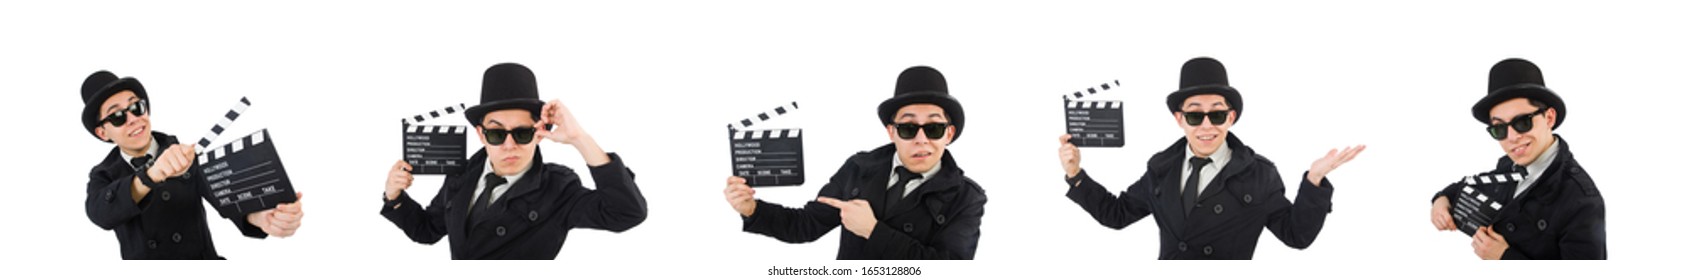 Man with movie clapper isolated on white - Shutterstock ID 1653128806